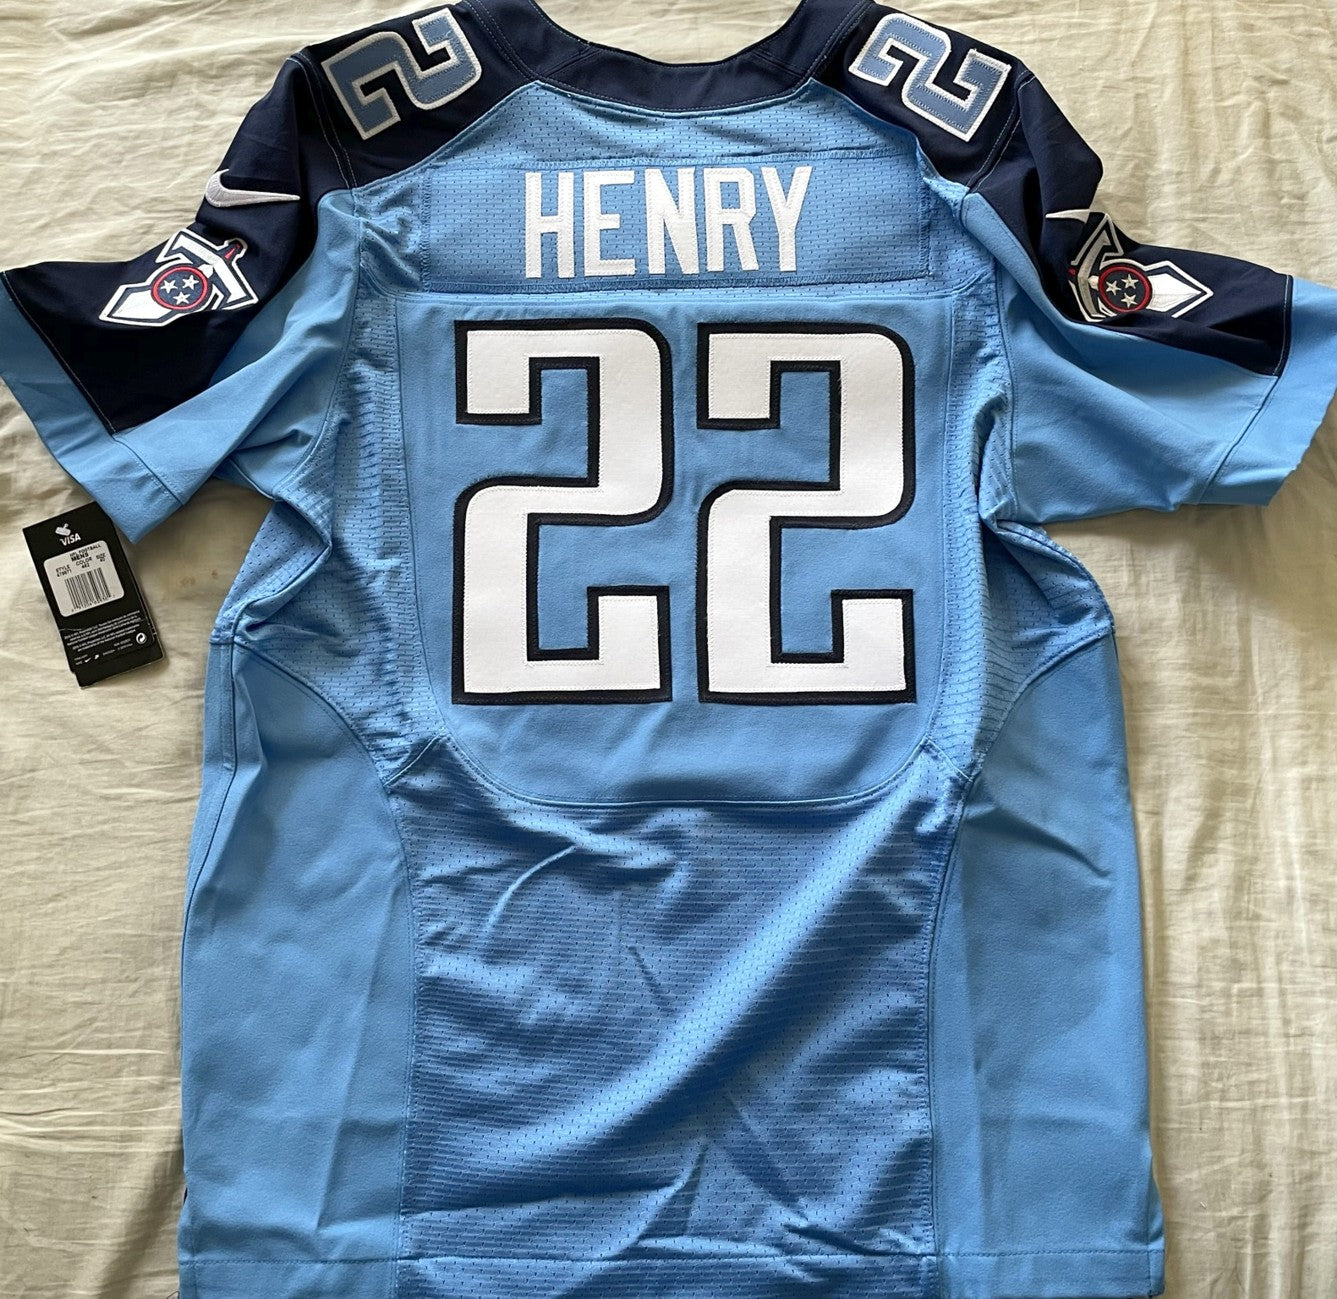 A Guide to the Confusing World of NFL Football Jerseys